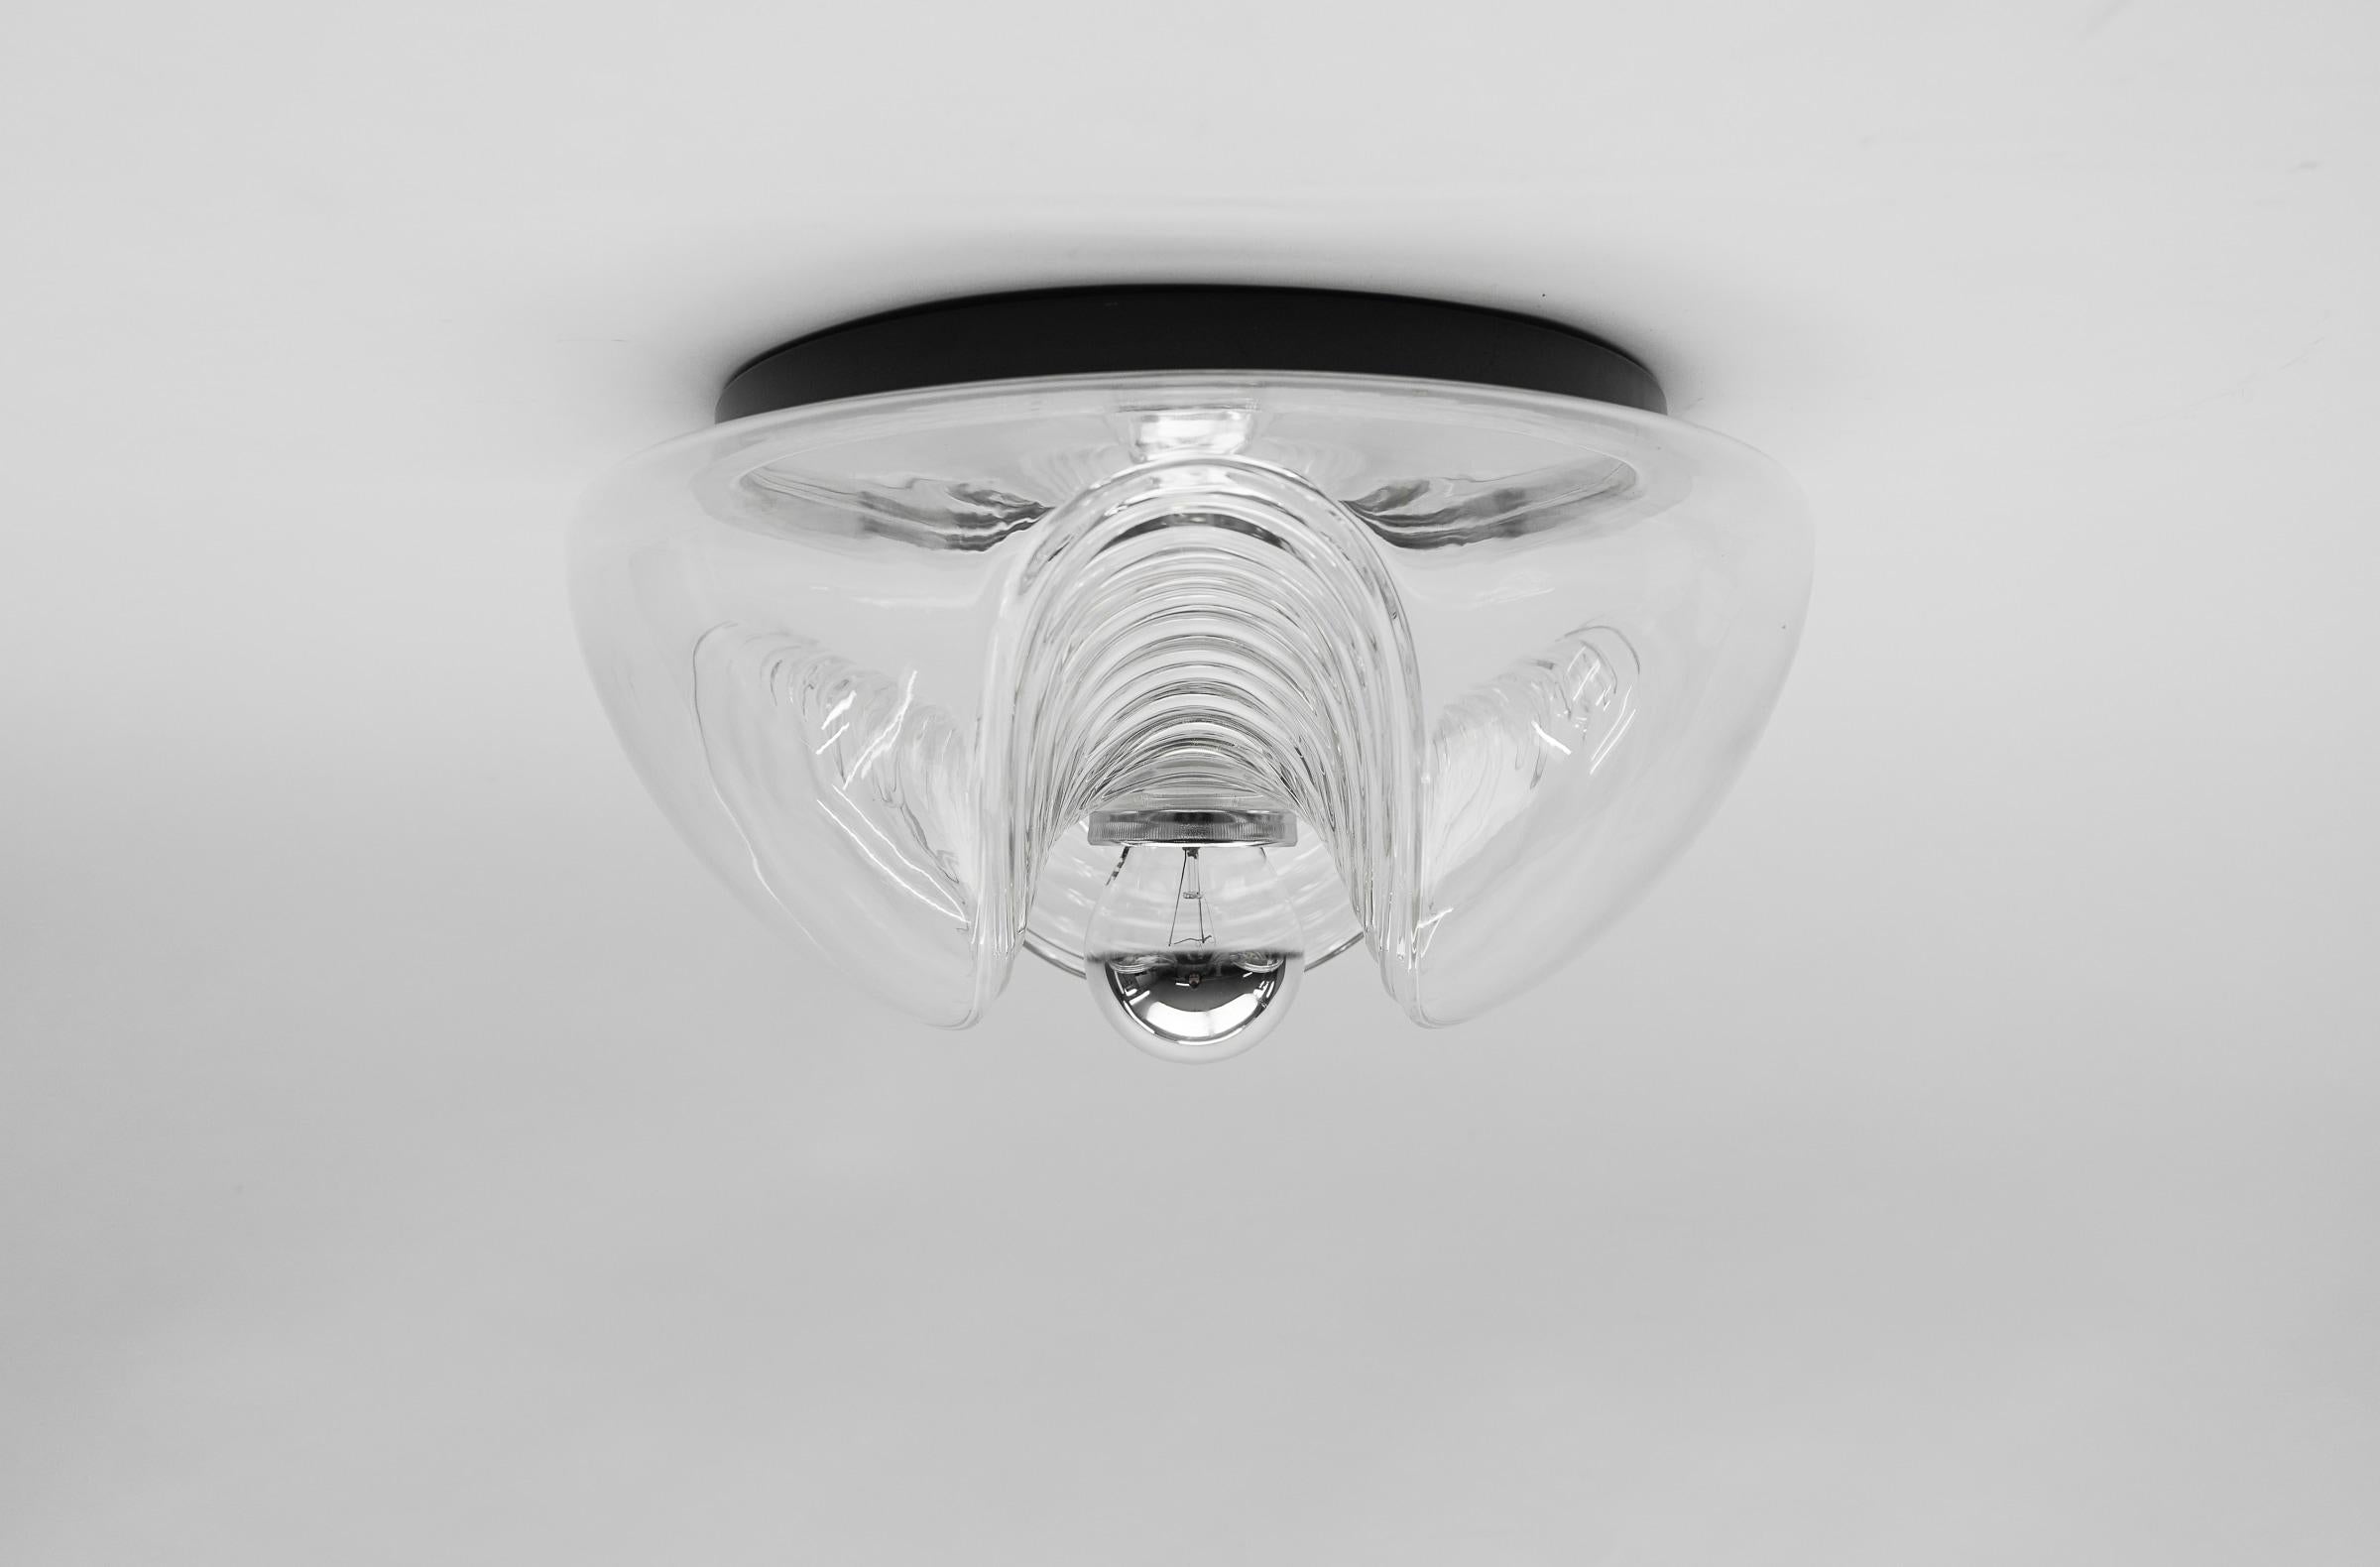 1 of 4 Large Wall Sconce or Flush mount light Koch & Lowy by Peill Putzler, Germany, 1970s

Dimensions
Height: 5.12 in. x Diameter: 13 in.
Height: 13 cm x Diameter: 32 cm

A special round biomorphic clear glass designed by Koch & Lowy for Peill &